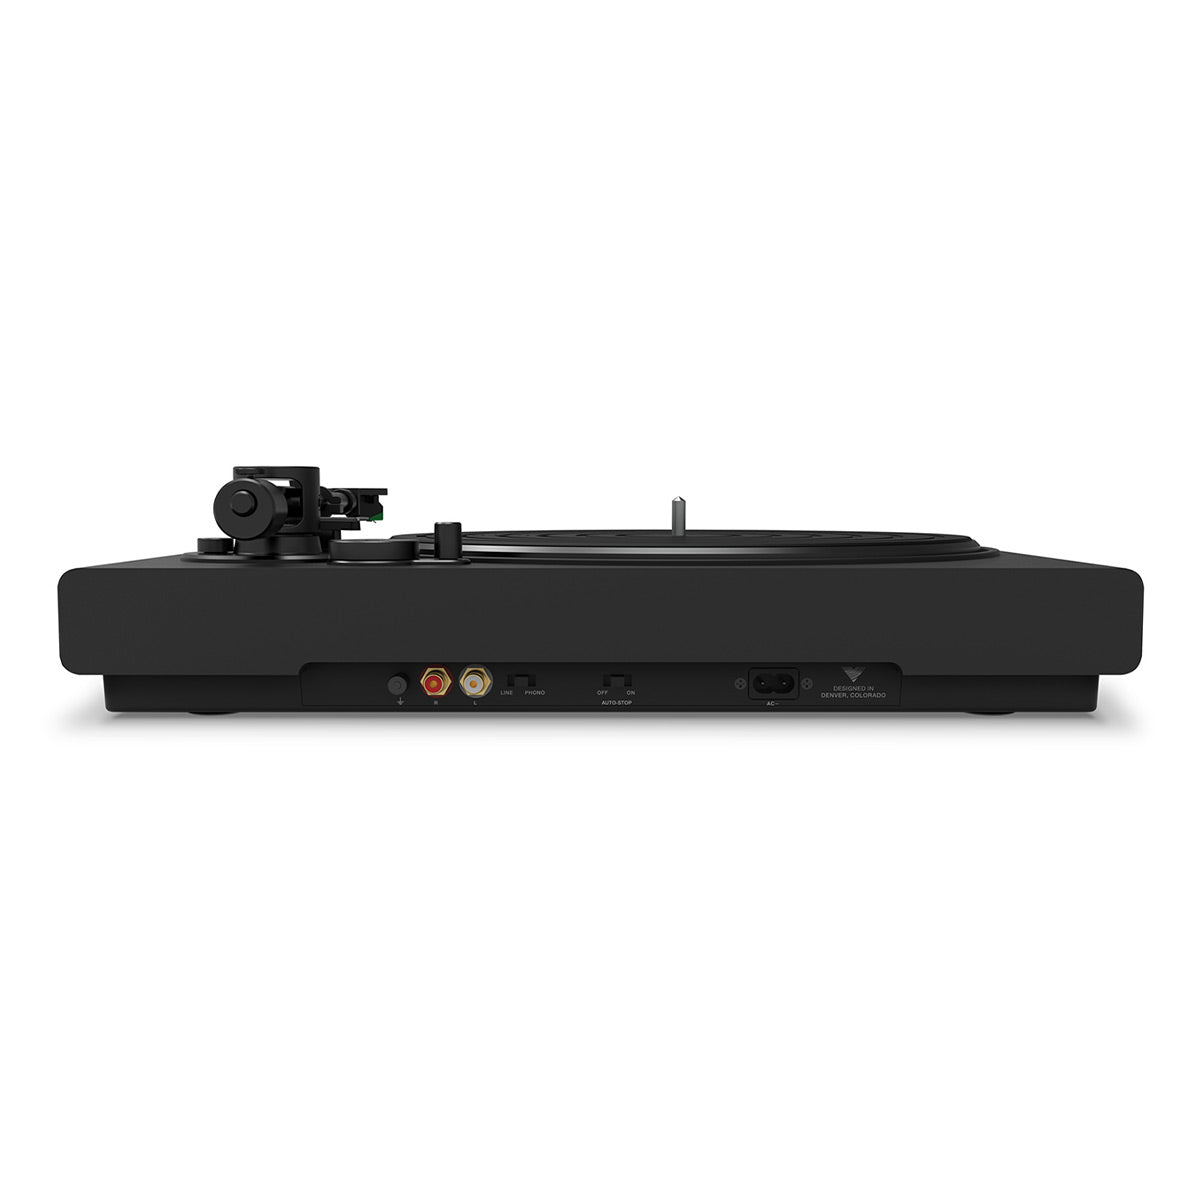 Victrola Hi-Res Onyx Bluetooth Turntable with aptX Adaptive Audio and Audio Technica AT-VM95E Cartridge